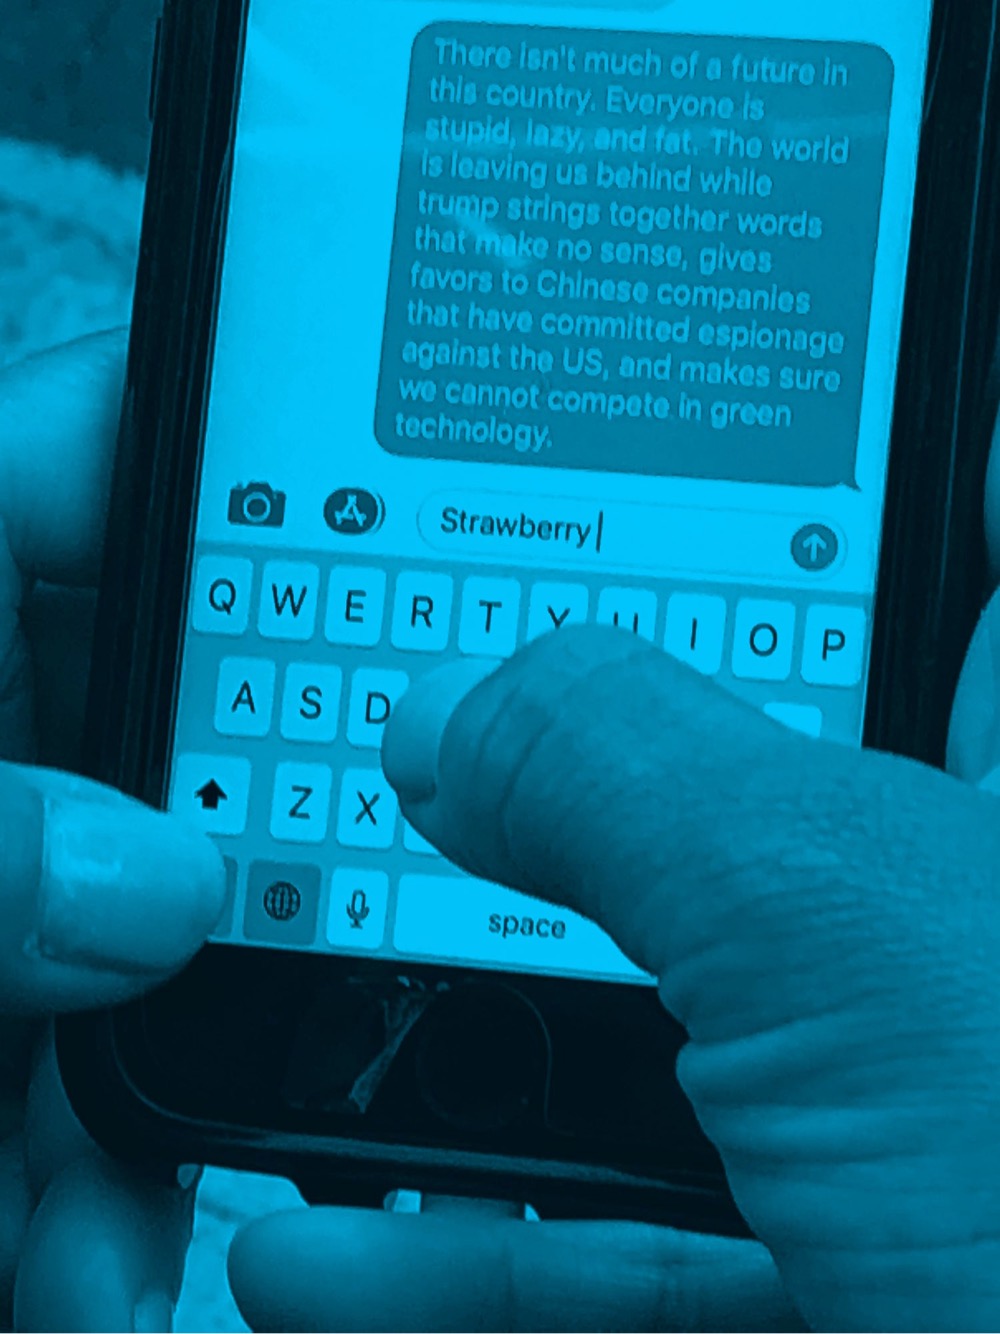 a photo of a text message chat about the future and strawberries